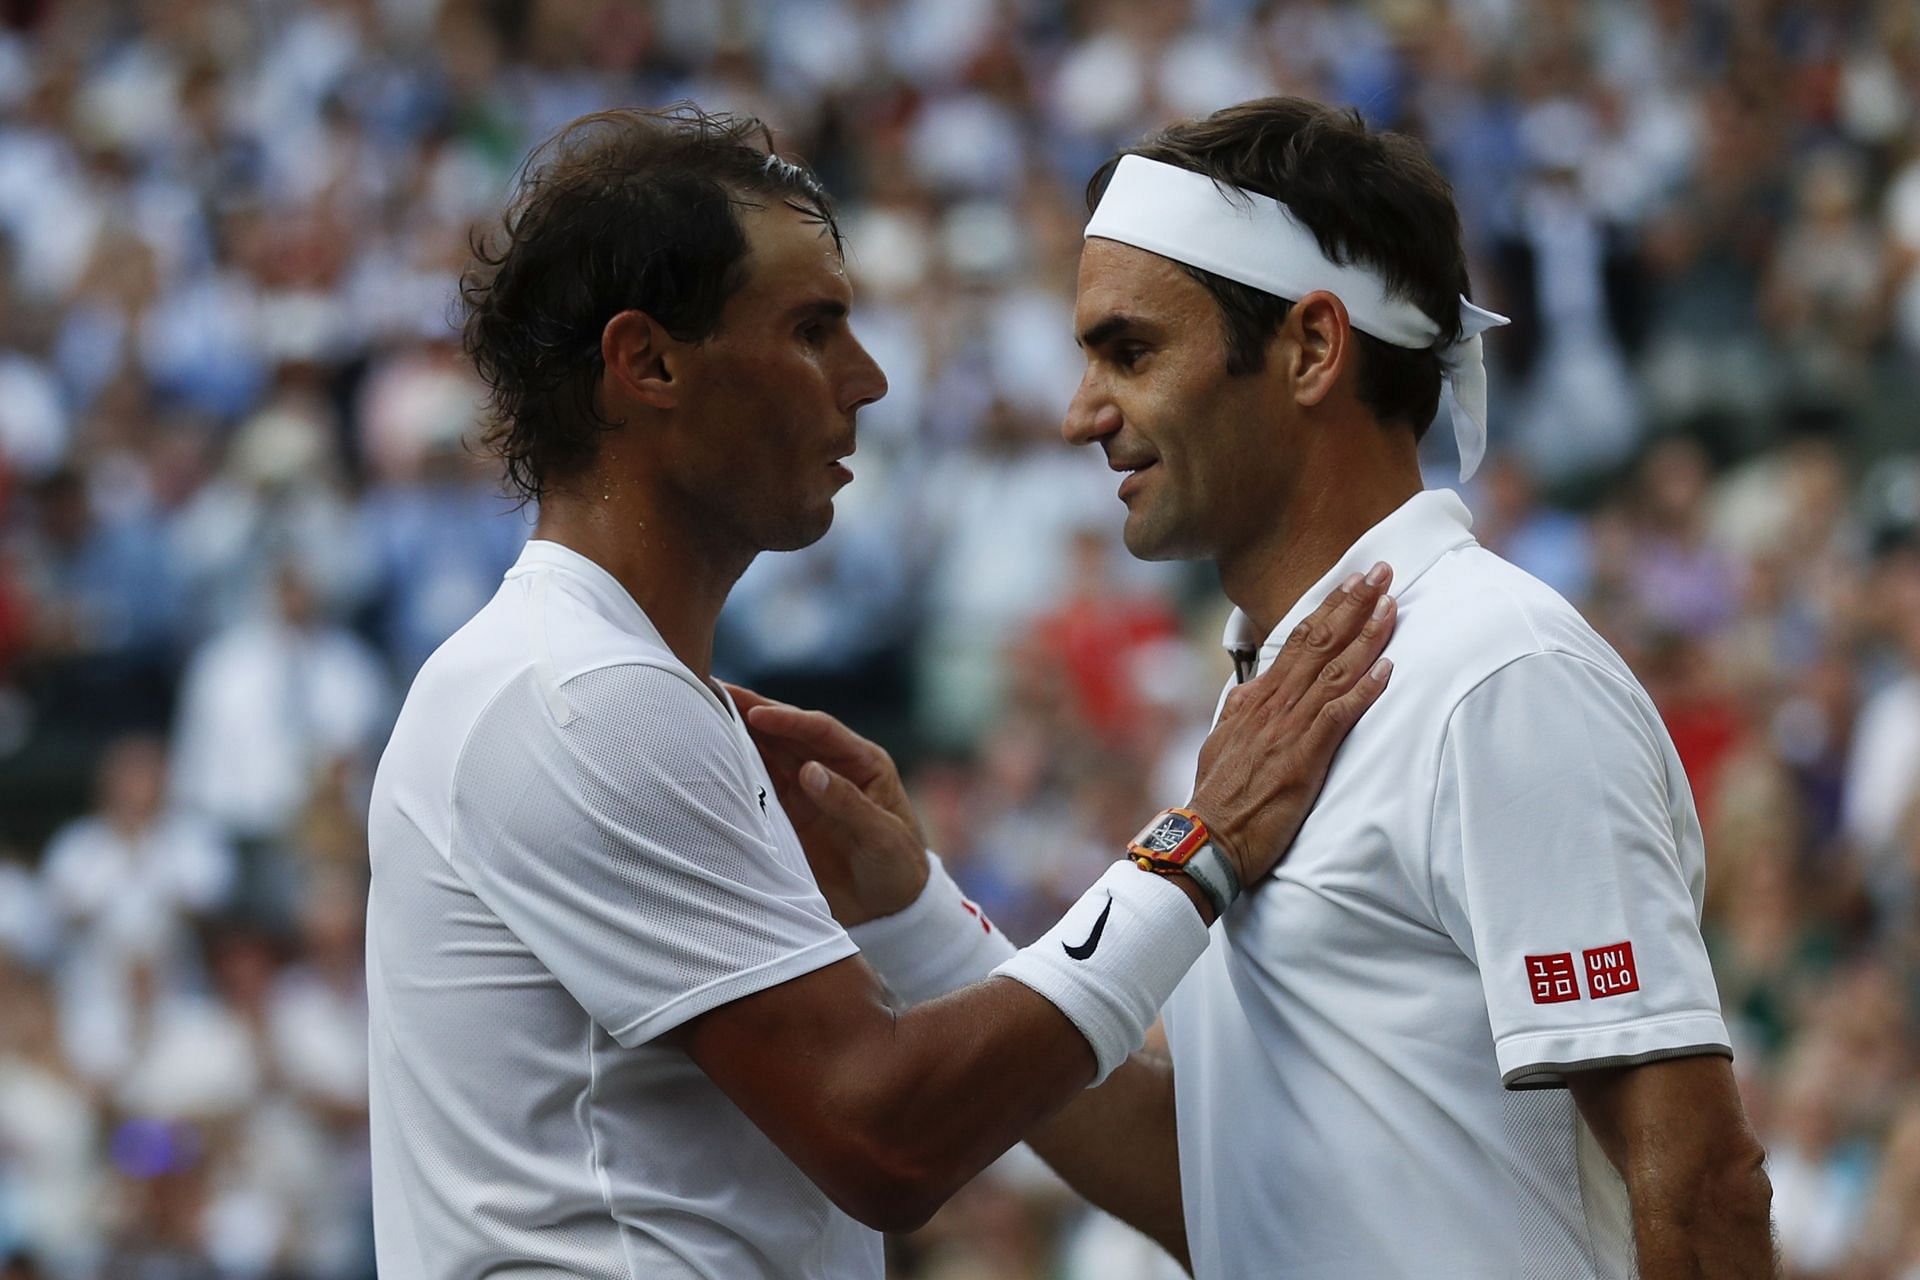 The two tennis legends last faced each other on tour at Wimbledon in 2019.